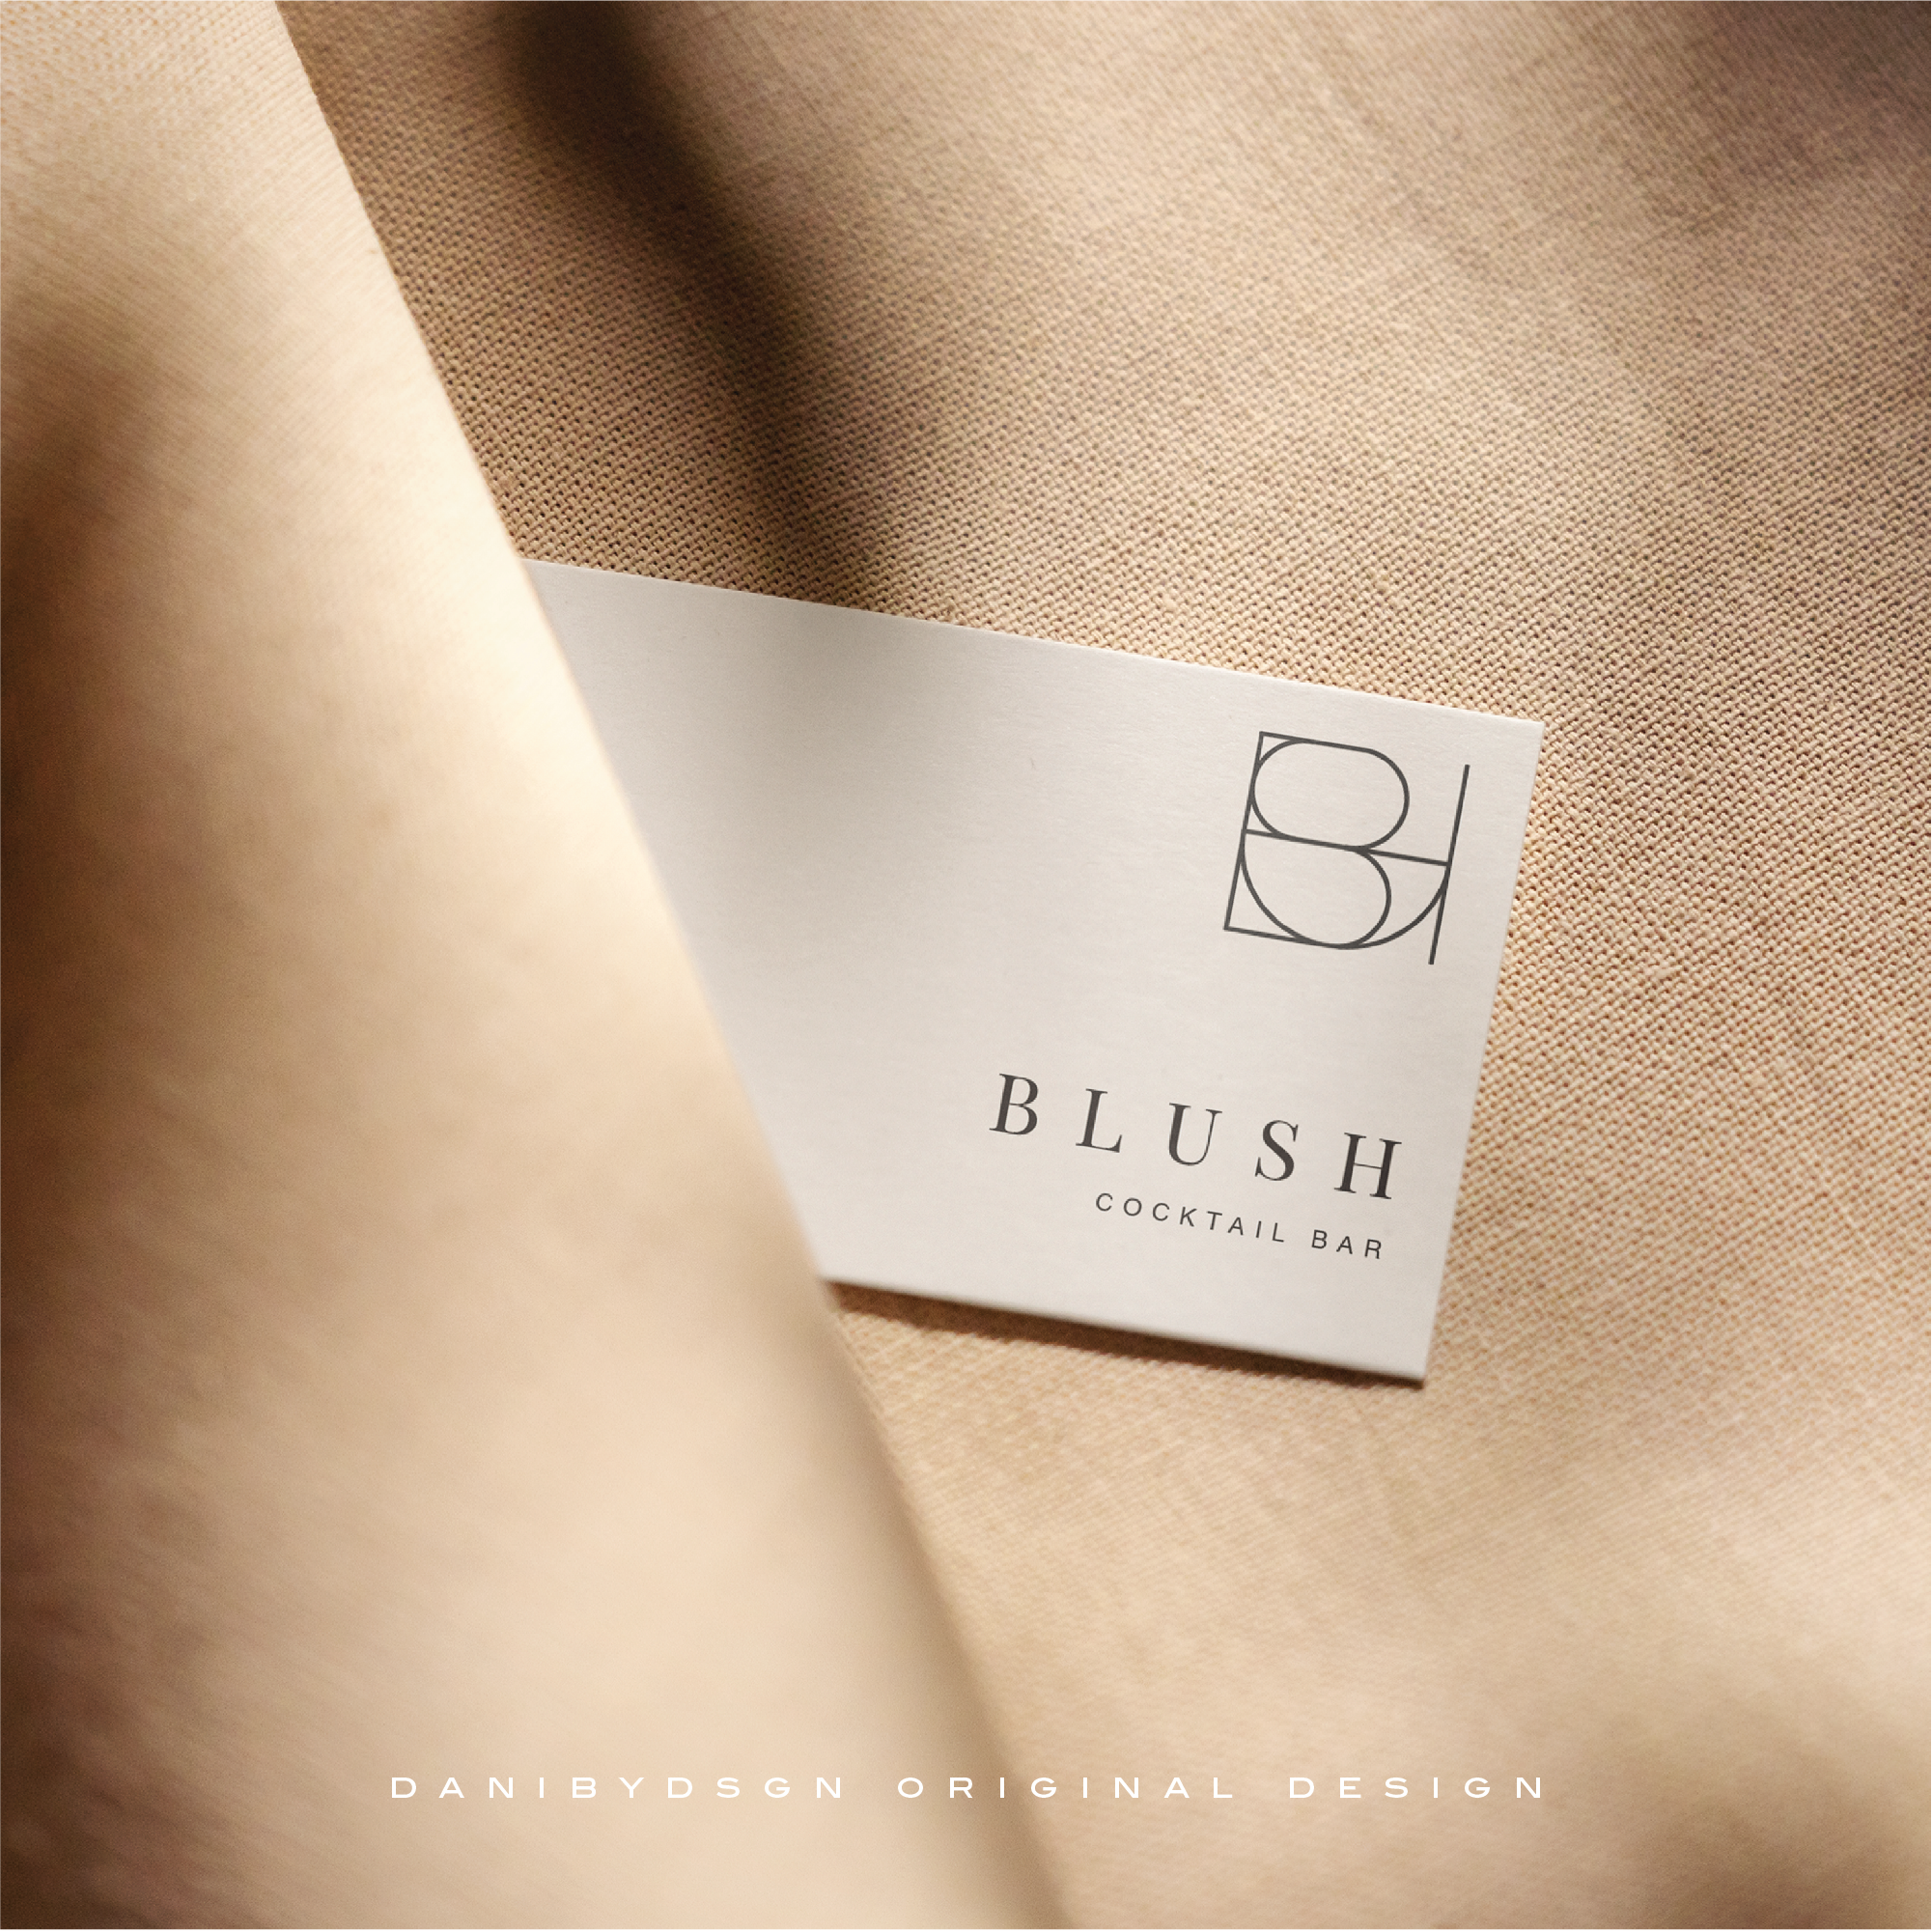 An elegant business card from Danibydsgn's Business Logo Design & Branding Kit, featuring the 'BLUSH Cocktail Bar' logo. The sophisticated design highlights the brand's identity and is a testament to the quality work of our business logo designs, suitable for website branding, weddings, clothing branding and event promotions. Danibydsgn's work as a graphic designer is evident, reflecting high-standard branding